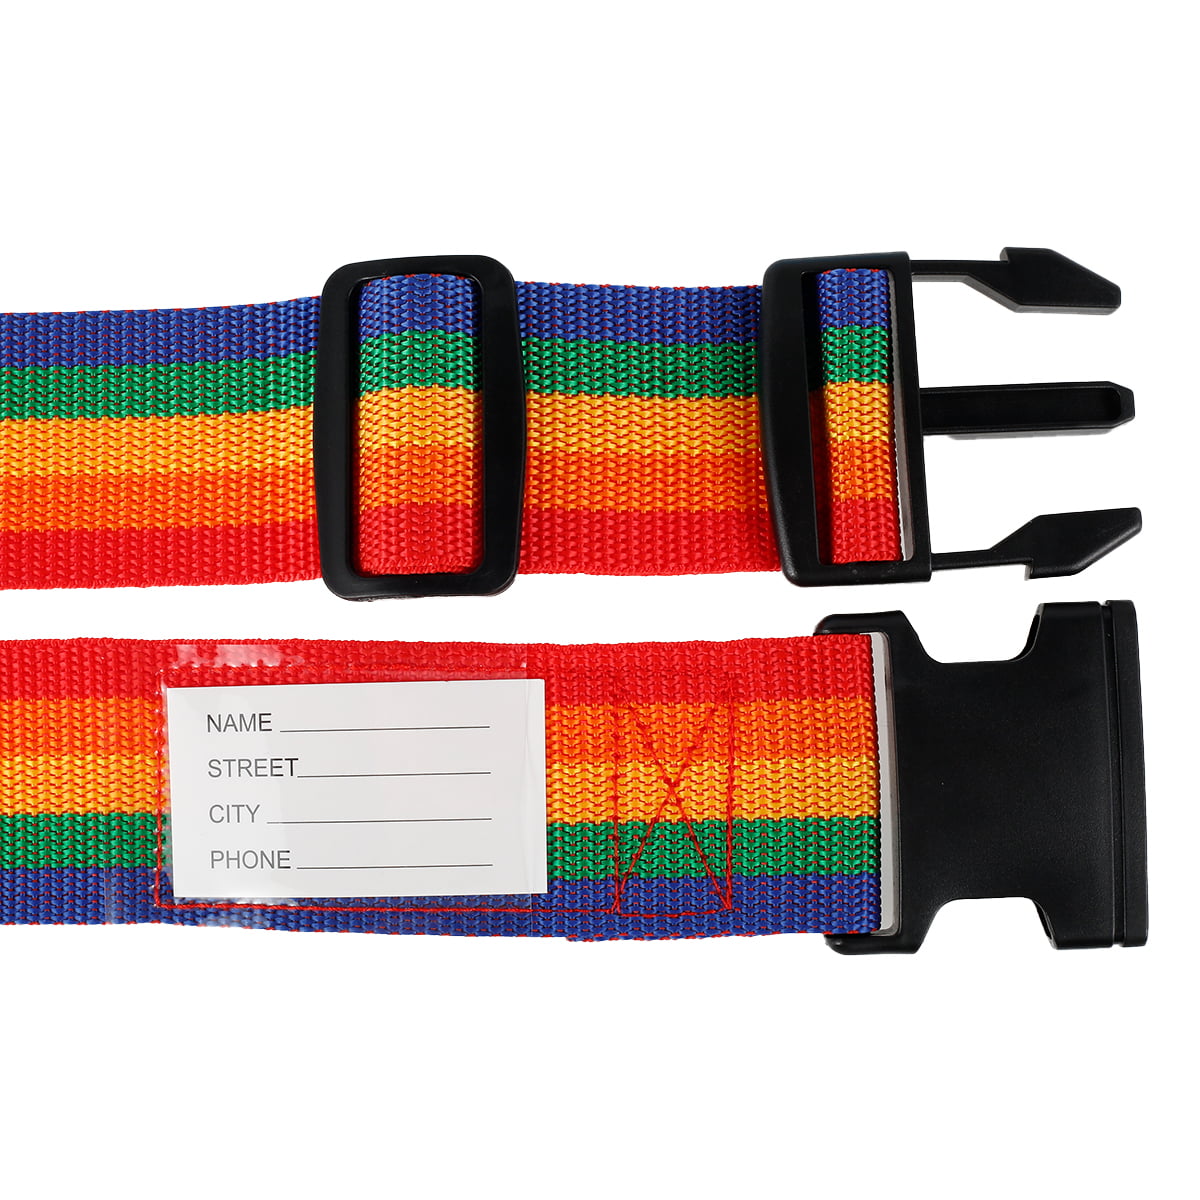 ToWinle 2 Pack Suitcase Travel Belt Colorful Rainbow Design with Lock Suitcase Quick Release Buckle Luggage Straps